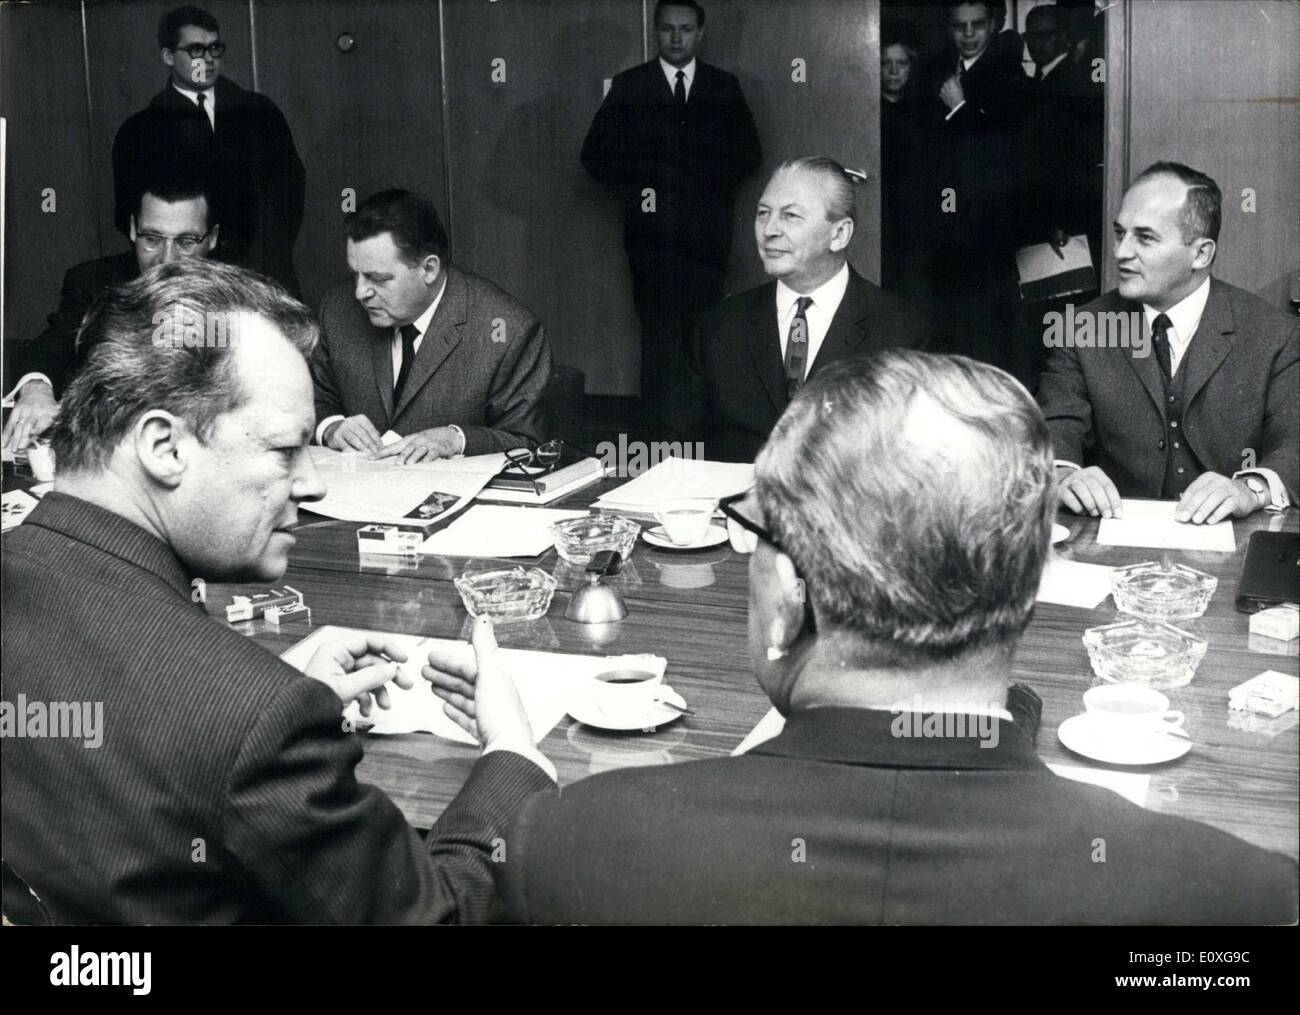 Nov. 15, 1966 - A CDU CSU Coalition Meeting took place in Bonn on Novebmer 15, 1966. They met with the SPD representatives. After the previous day's talks however any coalition between them seems unlikely. Now it looks like a coalition between the SPD and the FDP is liable to be formed. Pictured front row from left to right: Willy Brandt and the representative of chairman Herbert Wehner. Back Row: Parliamentary business leader of the CDU Will Rasner, chairman of the CSU Franz Josef Strauss, Kiesinger, and faction chairman of the CDU/CSU Rainer Barzel. Stock Photo